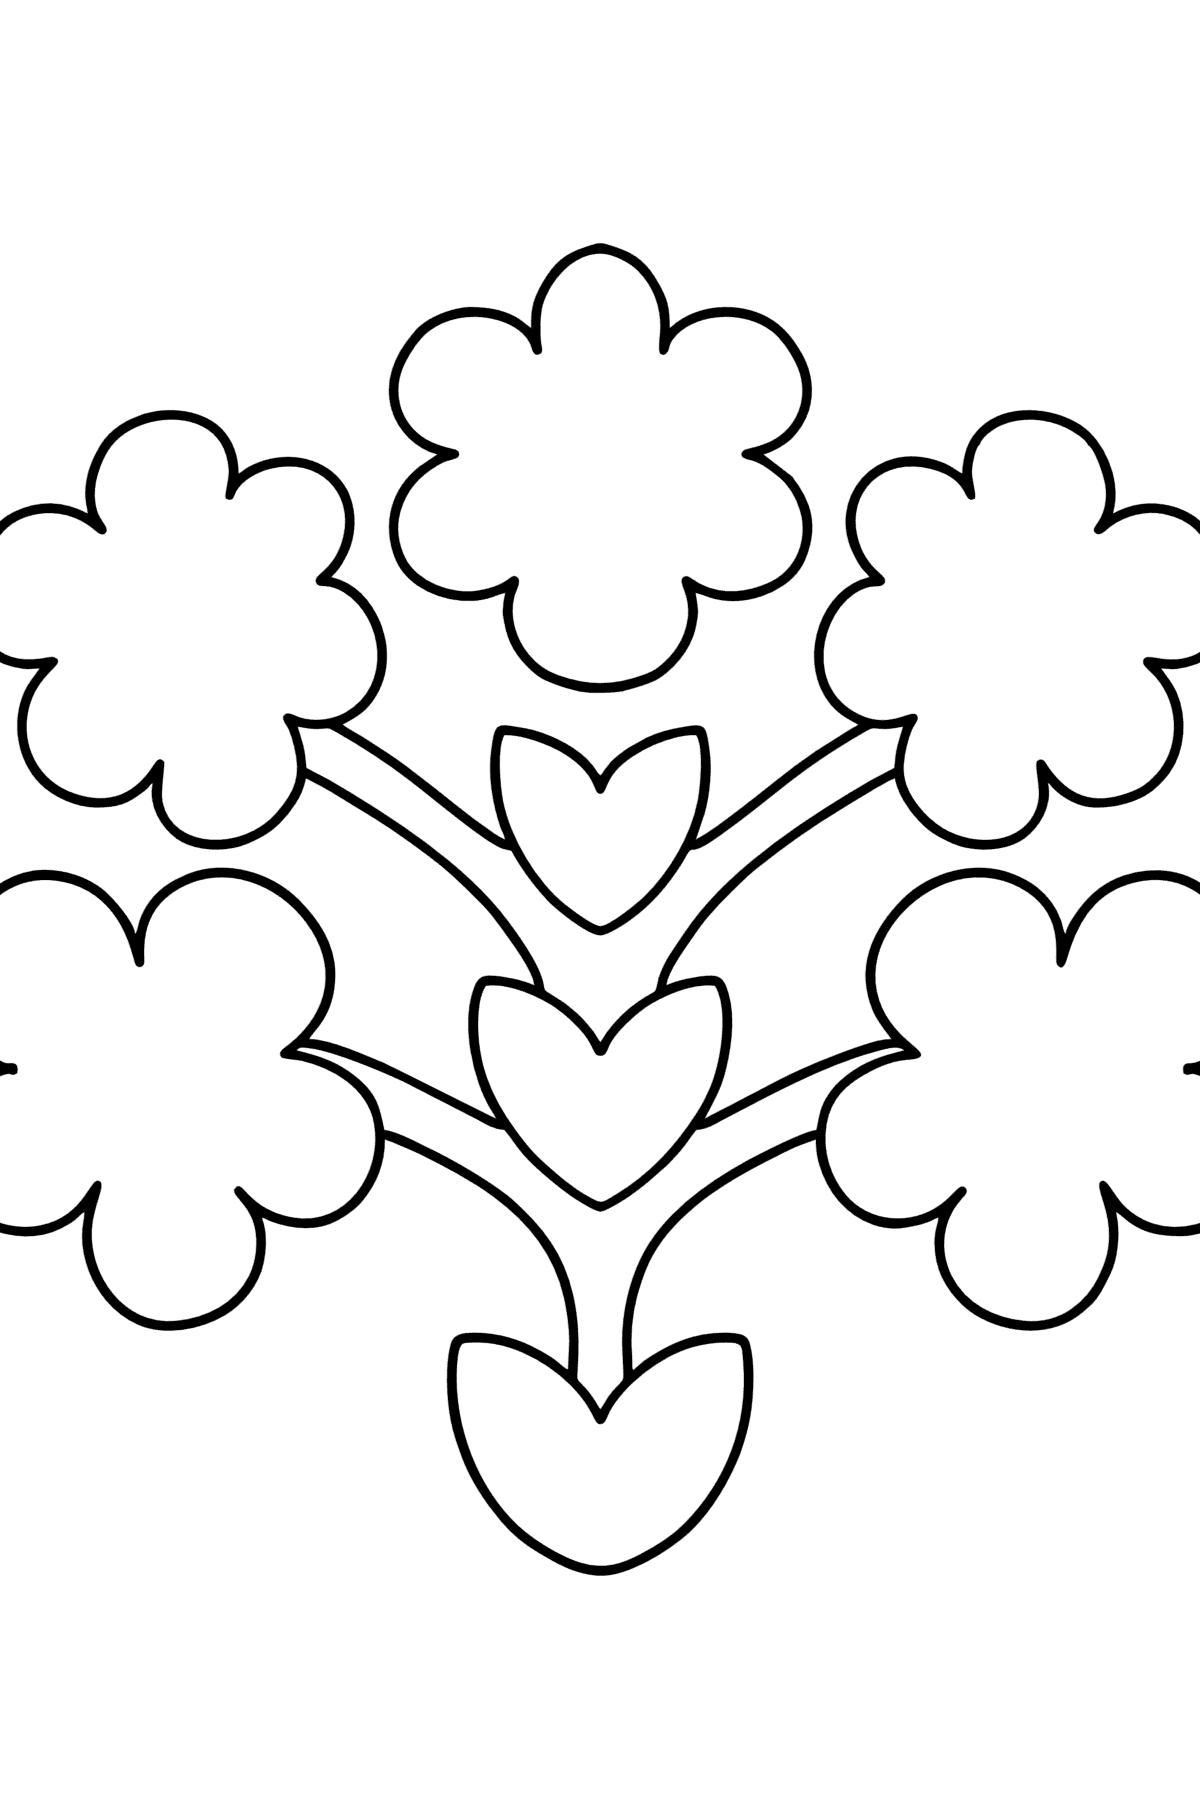 Zentangle Art flower coloring pages for kids - Coloring Pages for Kids